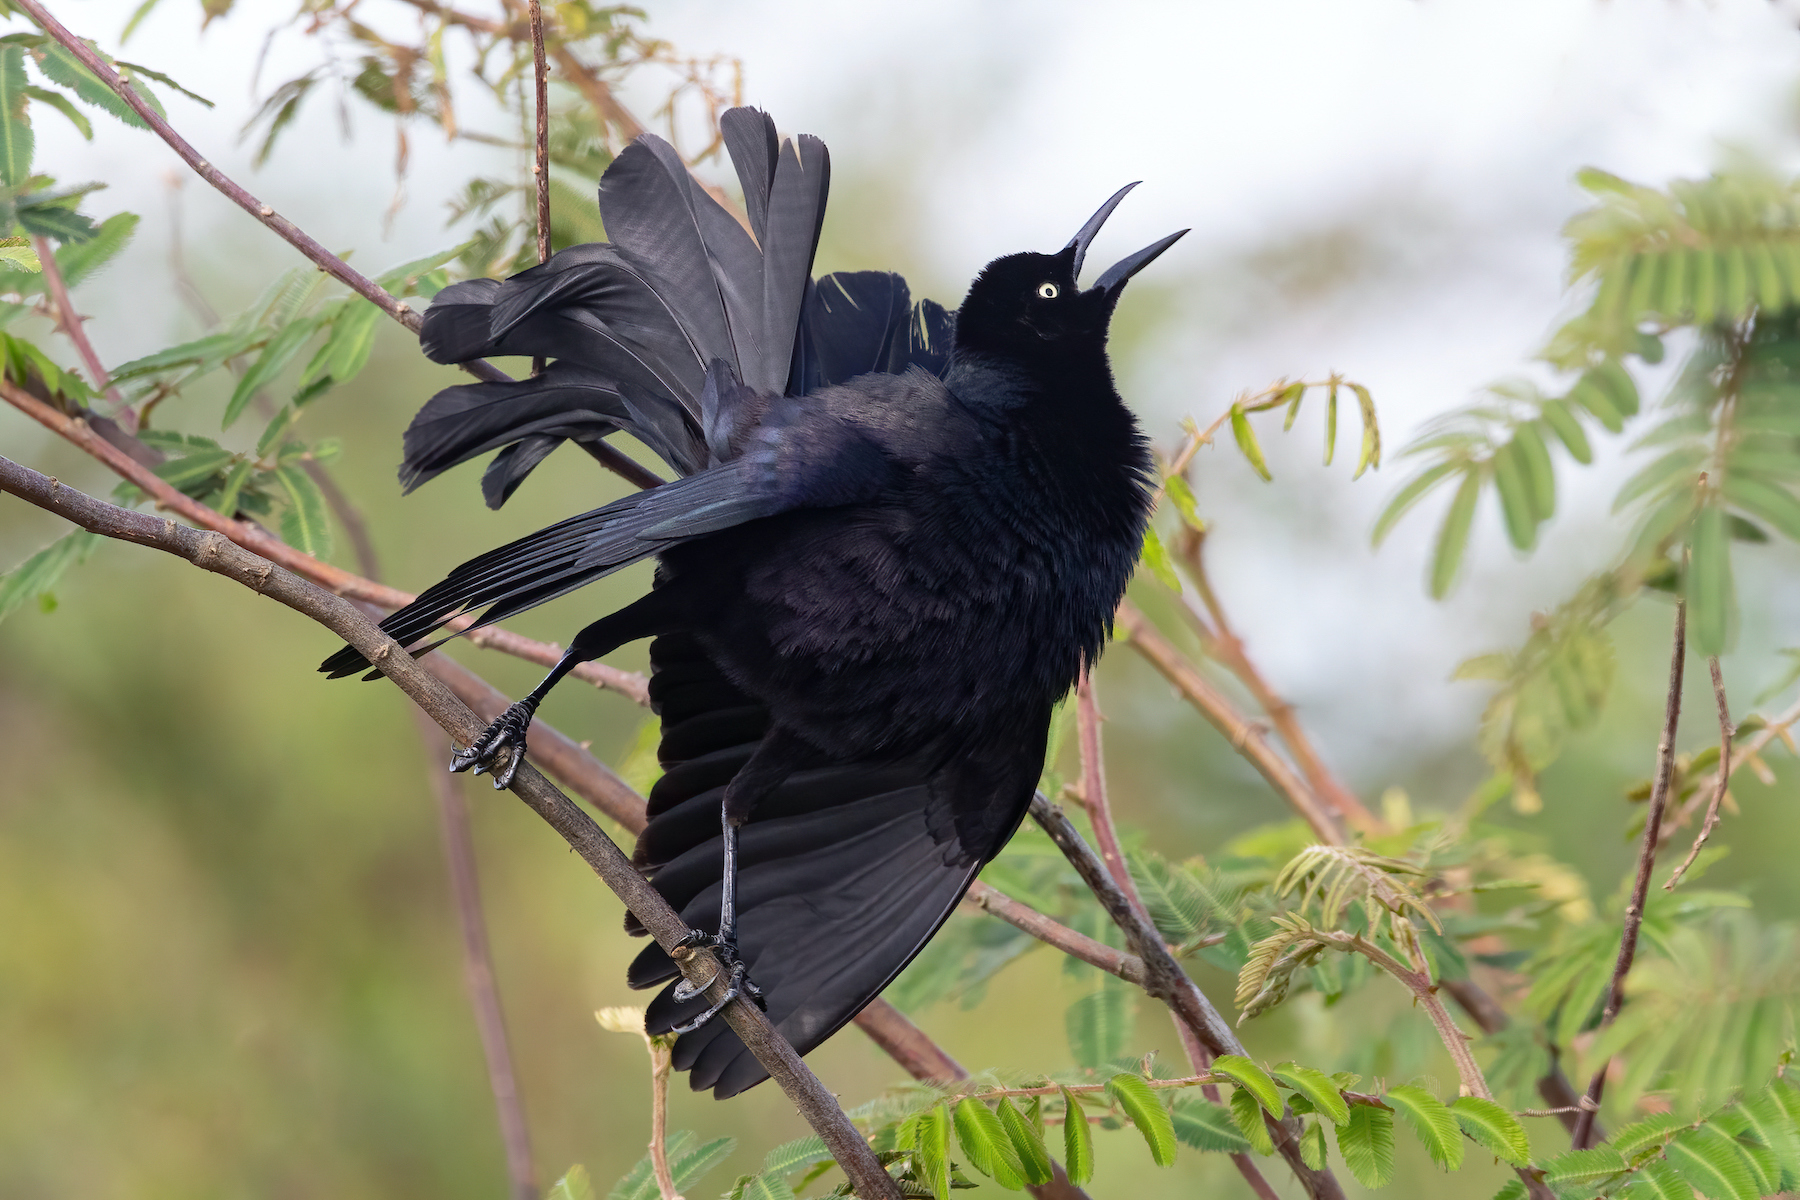 A Nicaraguan Grackle in full display mode at Cano Negro